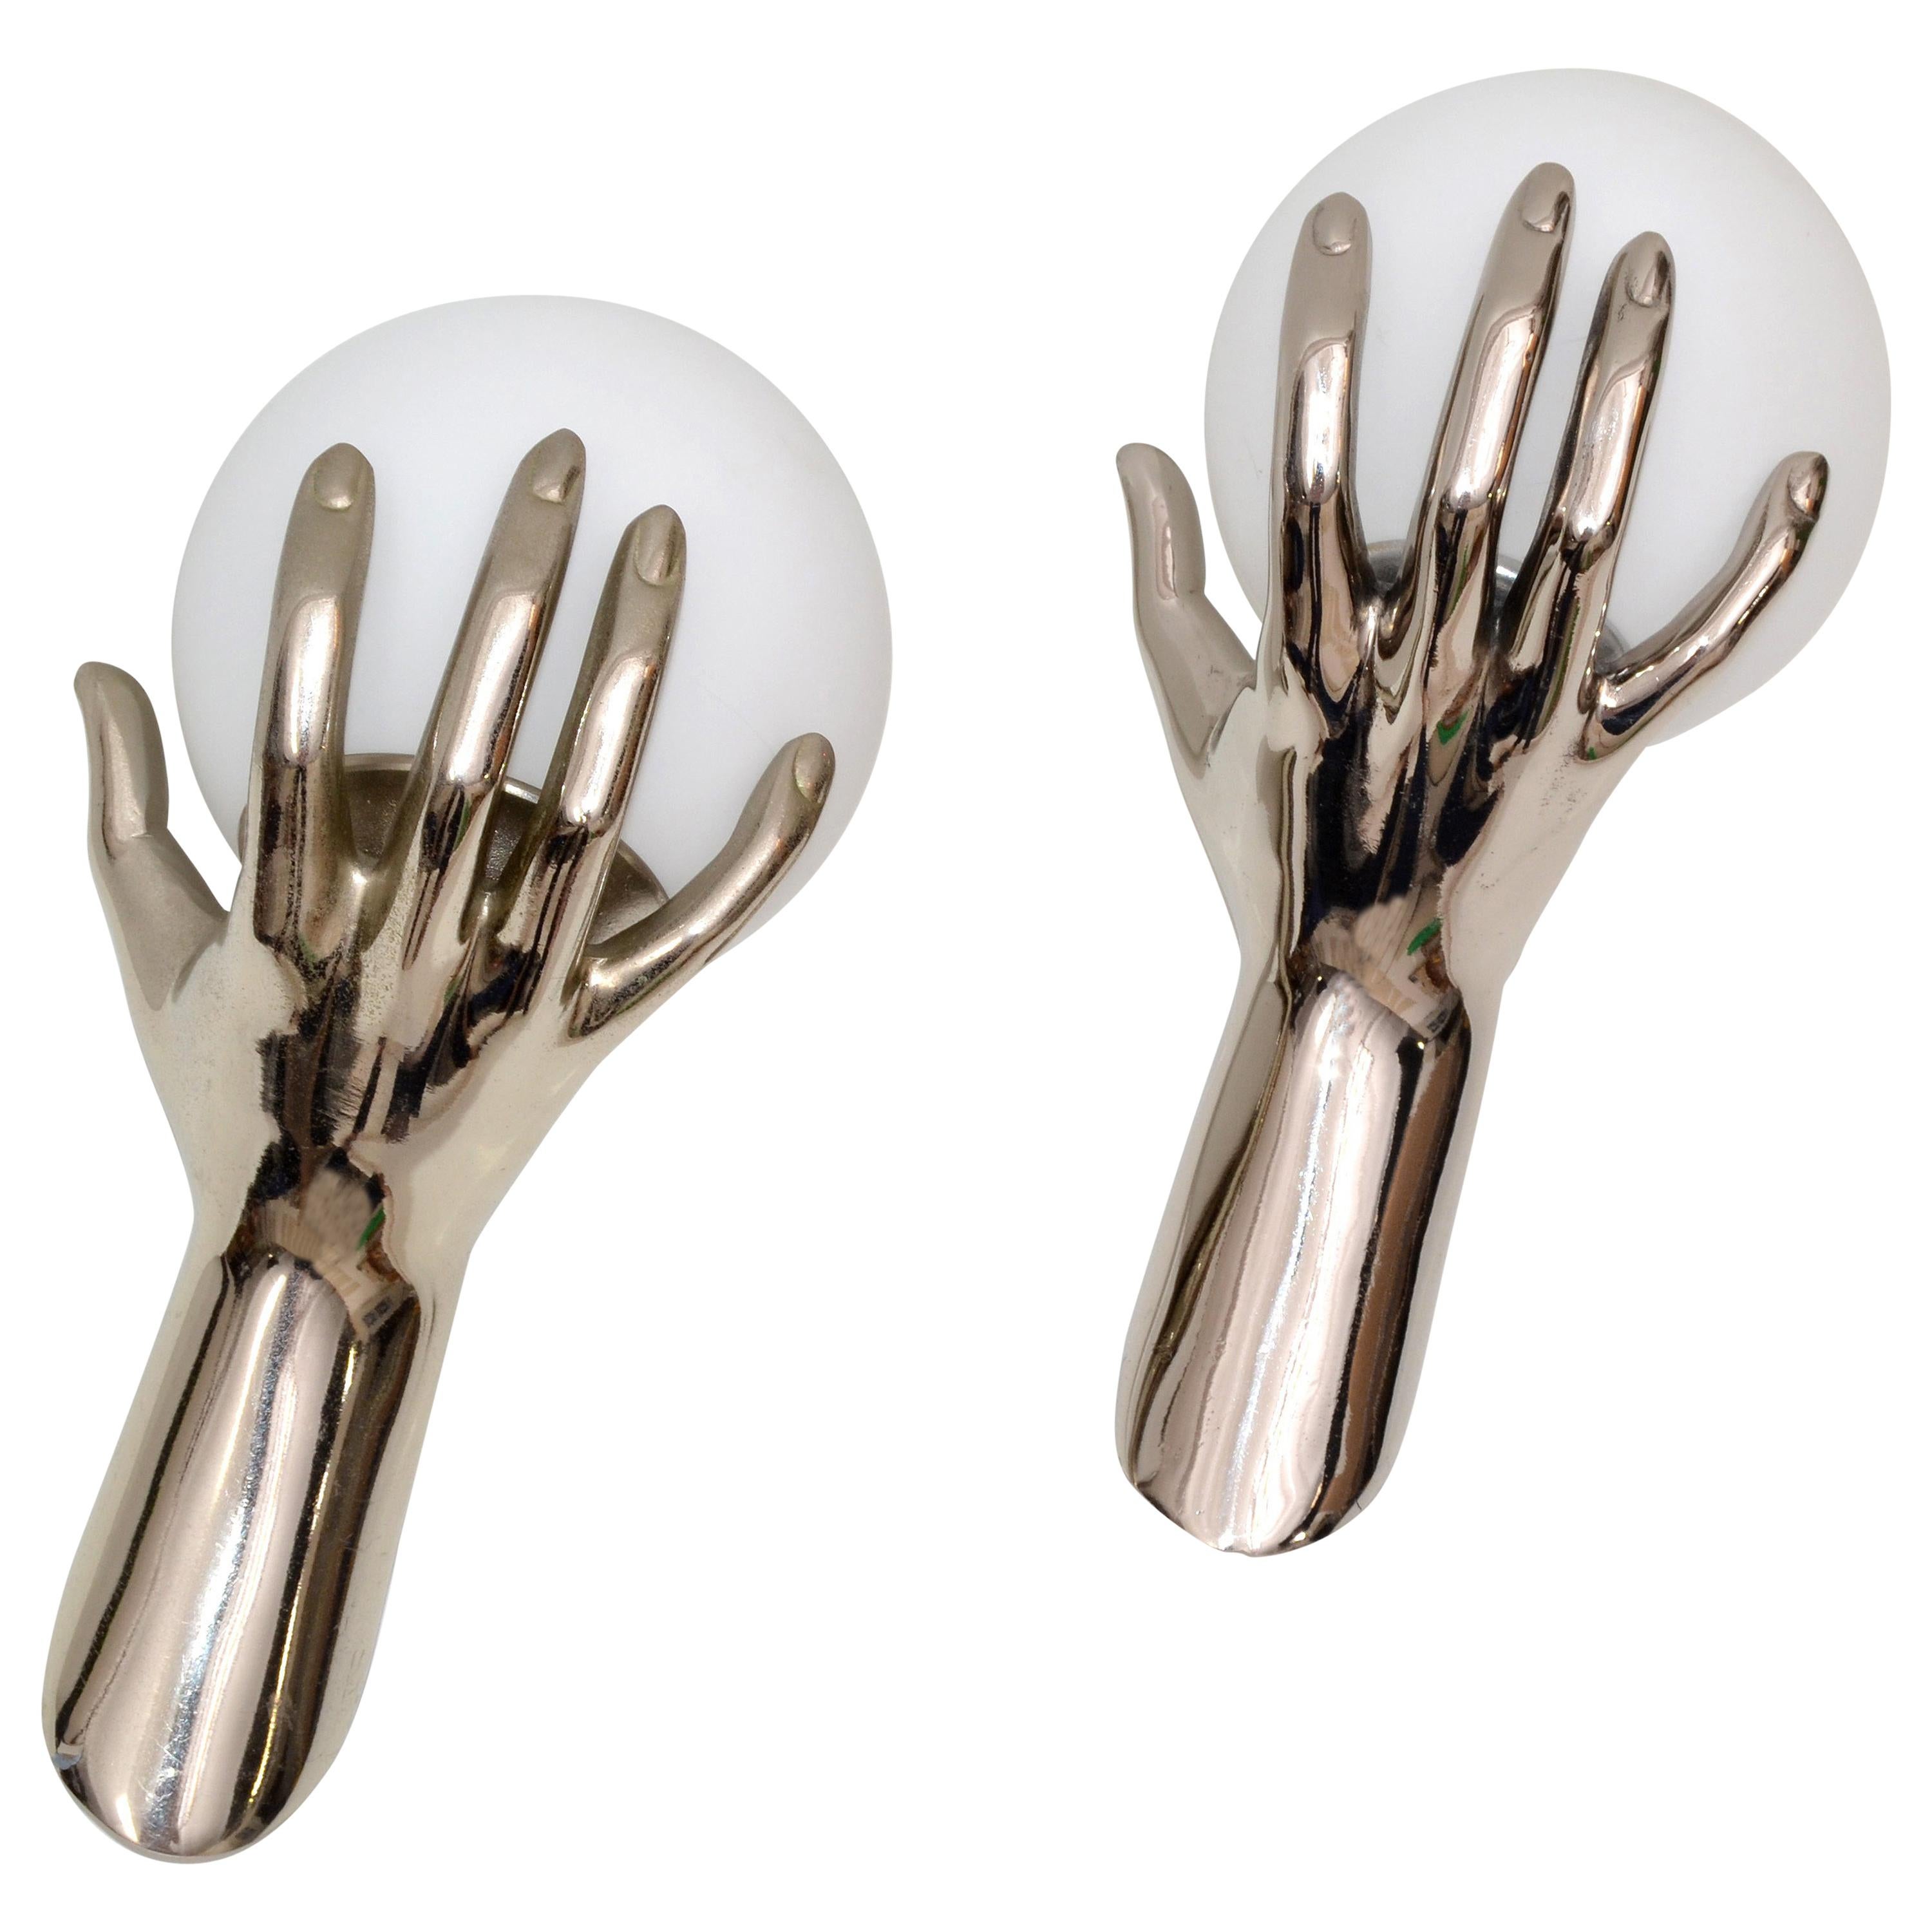 Maison Arlus French Silver Patina Hand Sconces and White Opaline Shades, 1970 For Sale